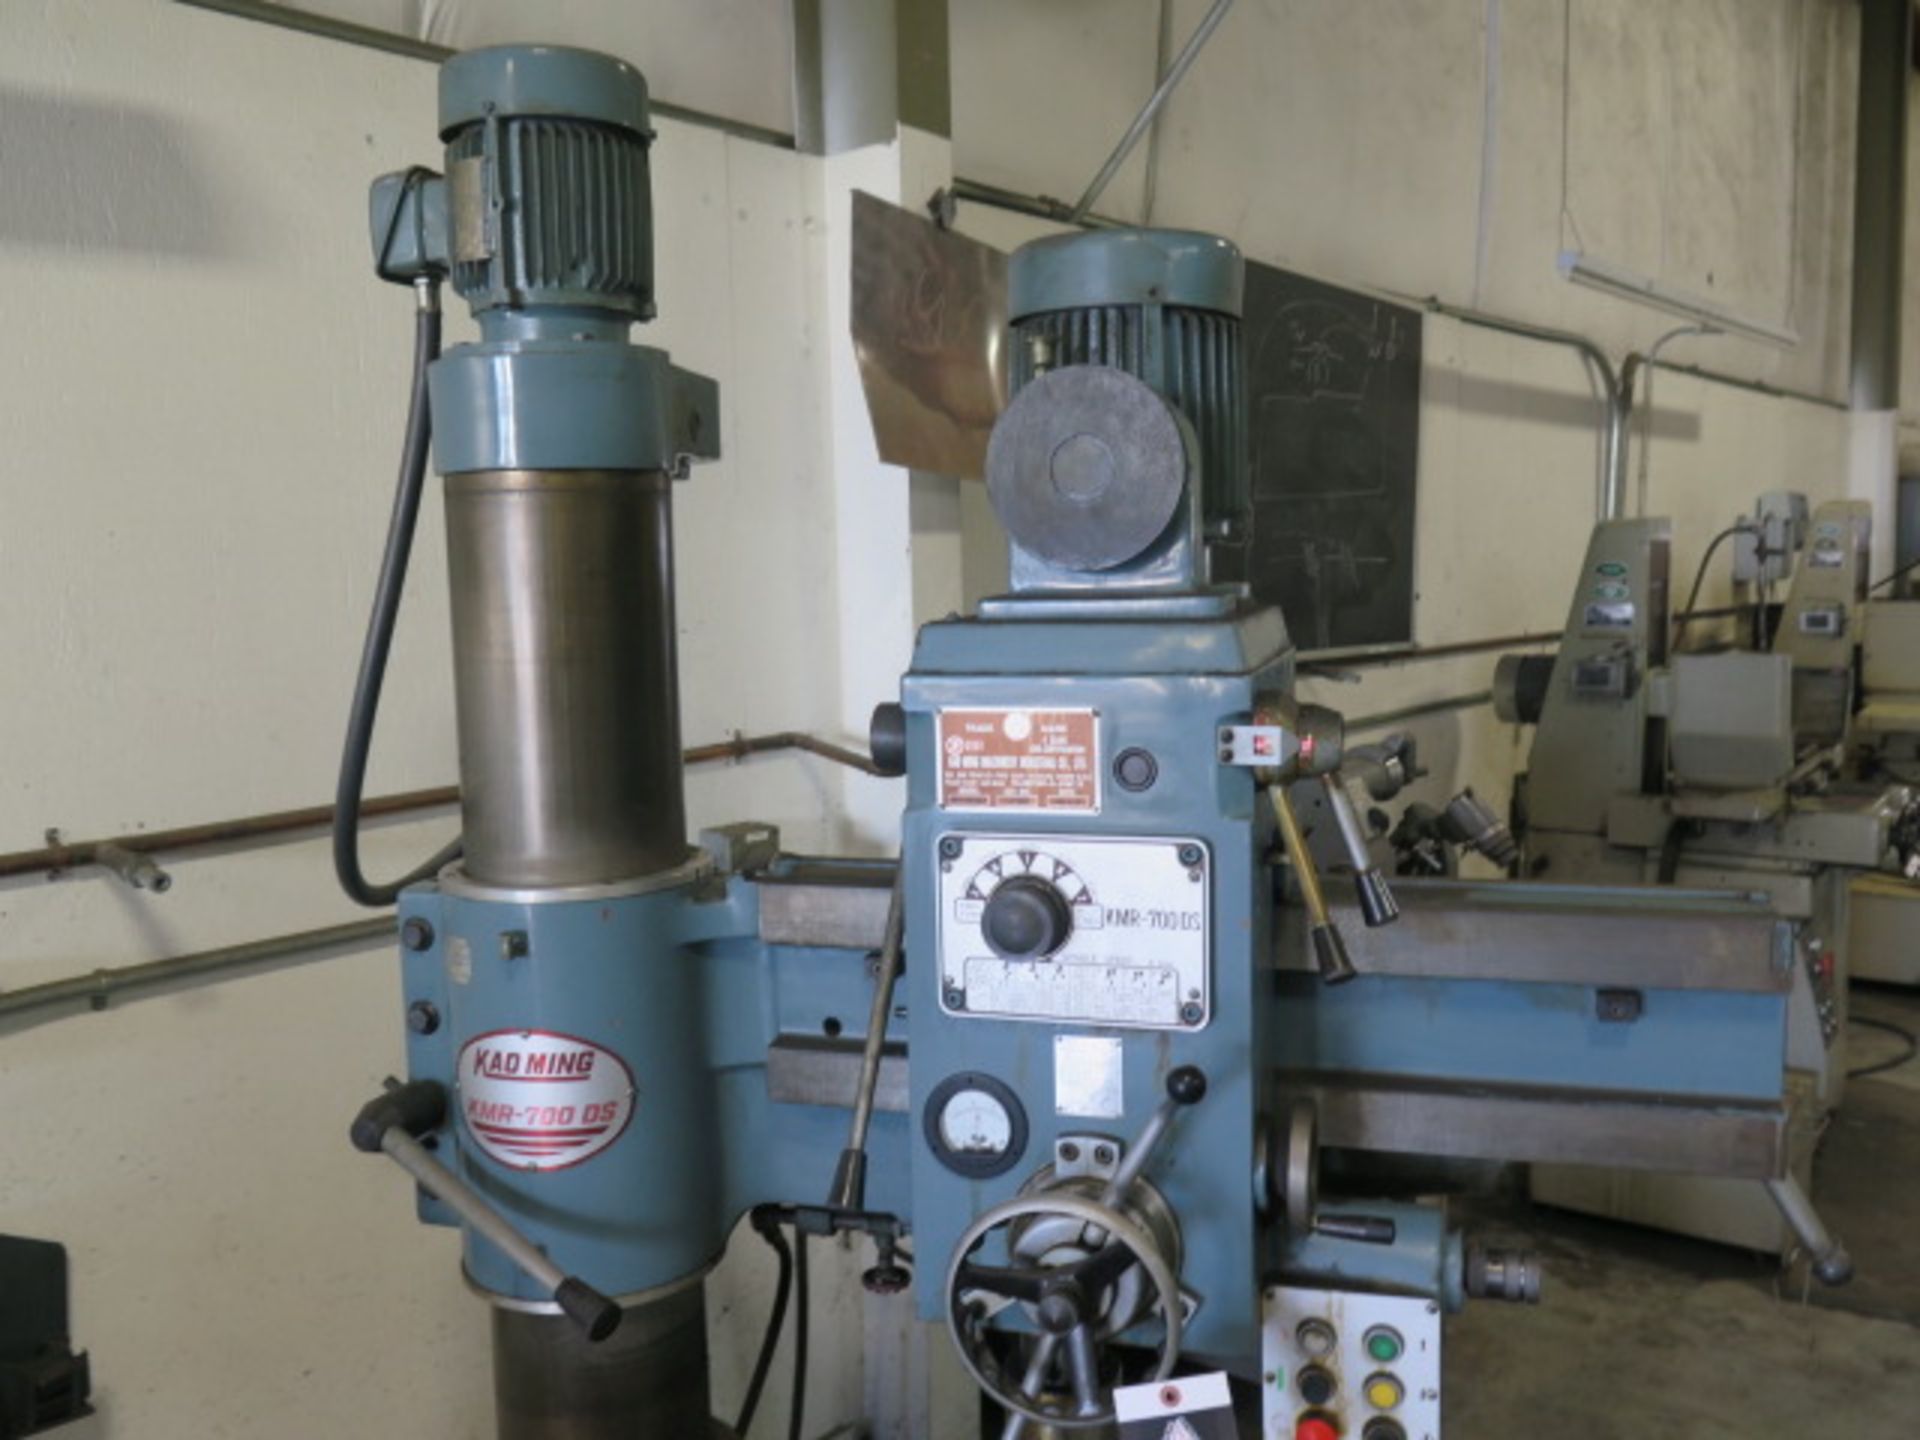 YCI Supermax KMR-700DS 8" Column x 22" Radial Arm Drill s/n 15495 w/ 88-1500 RPM, SOLD AS IS - Image 3 of 13